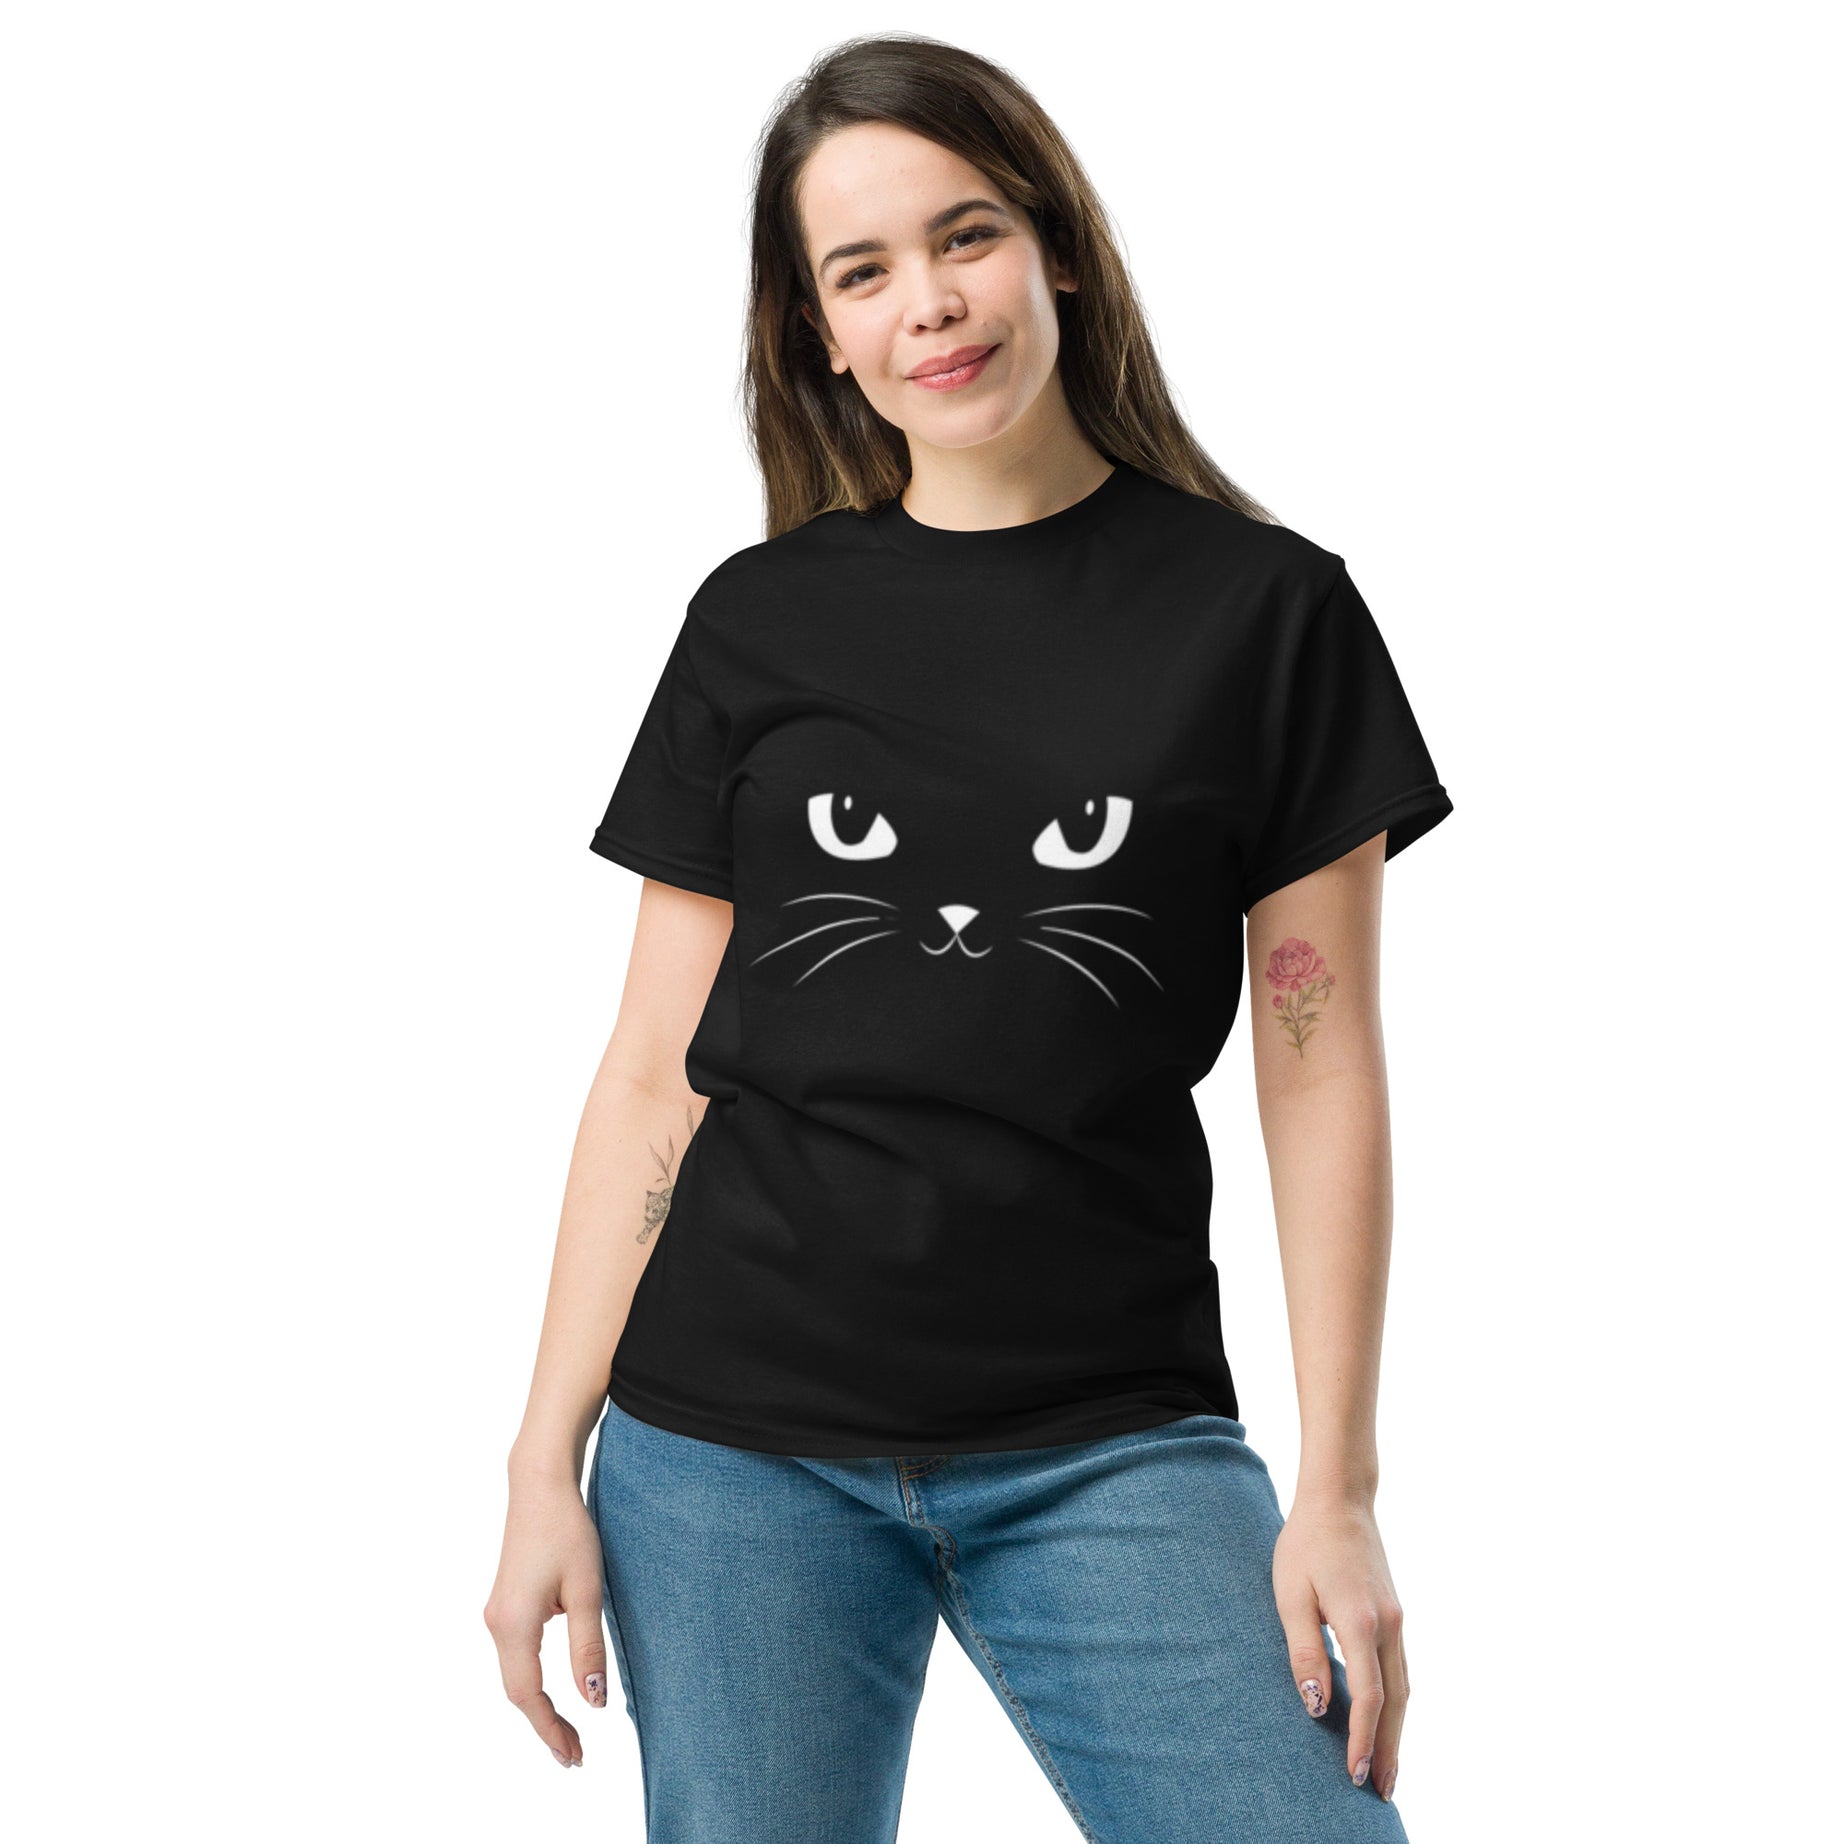 Whiskered Wonder: The Classic Black Cat Tee